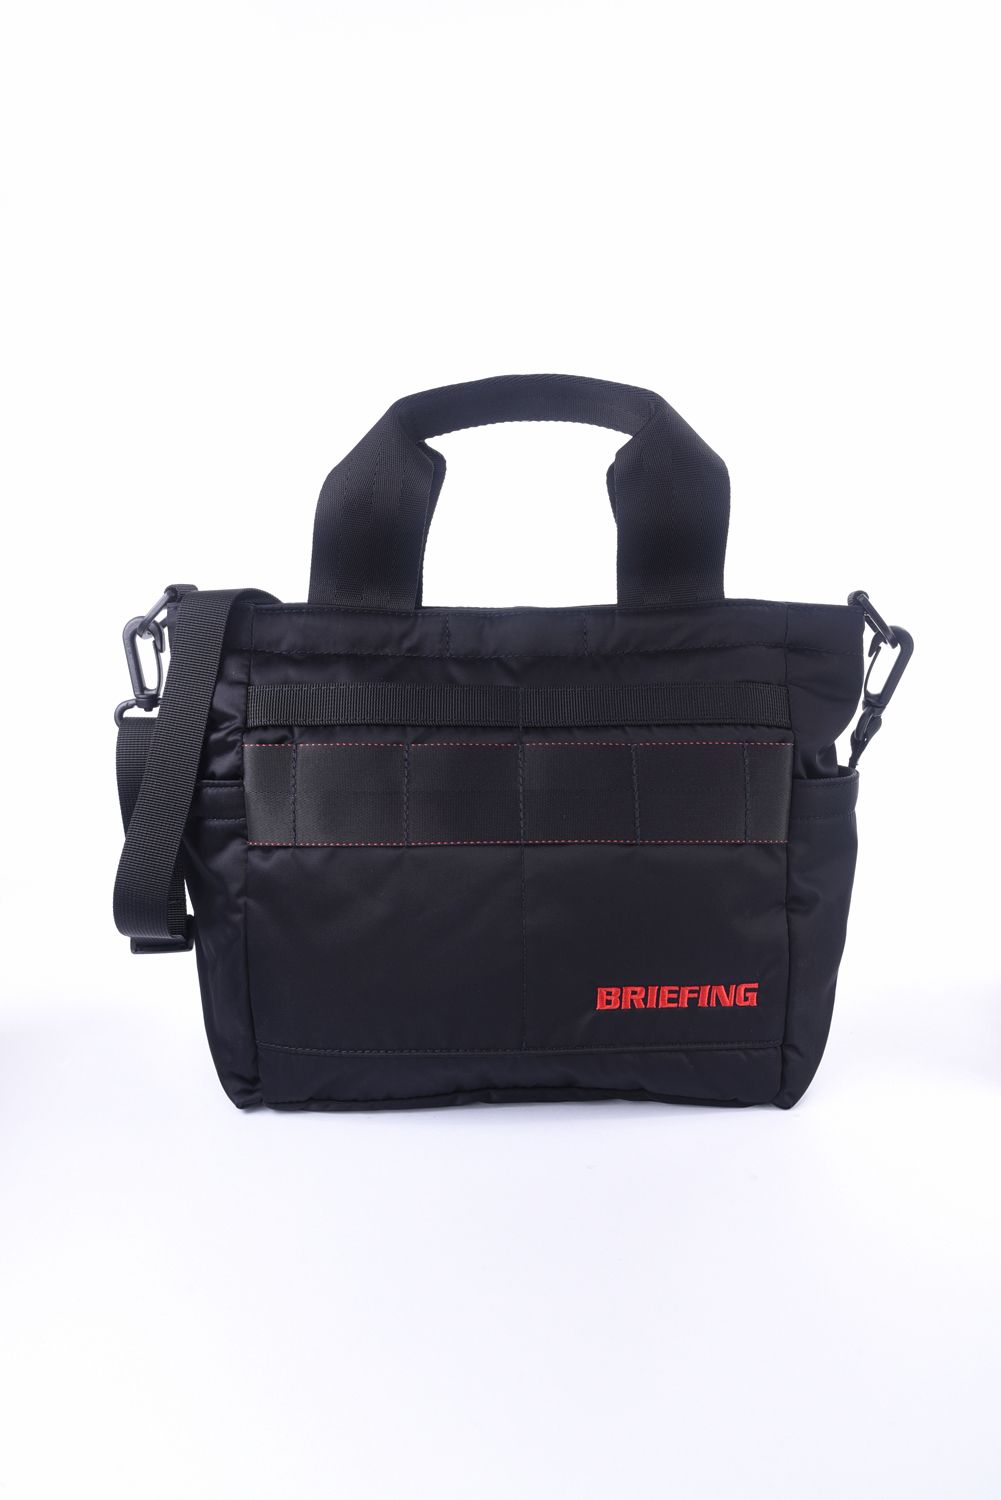 BRIEFING - 【エコツイル】 CART TOTE / カートトートバッグ ネイビー 